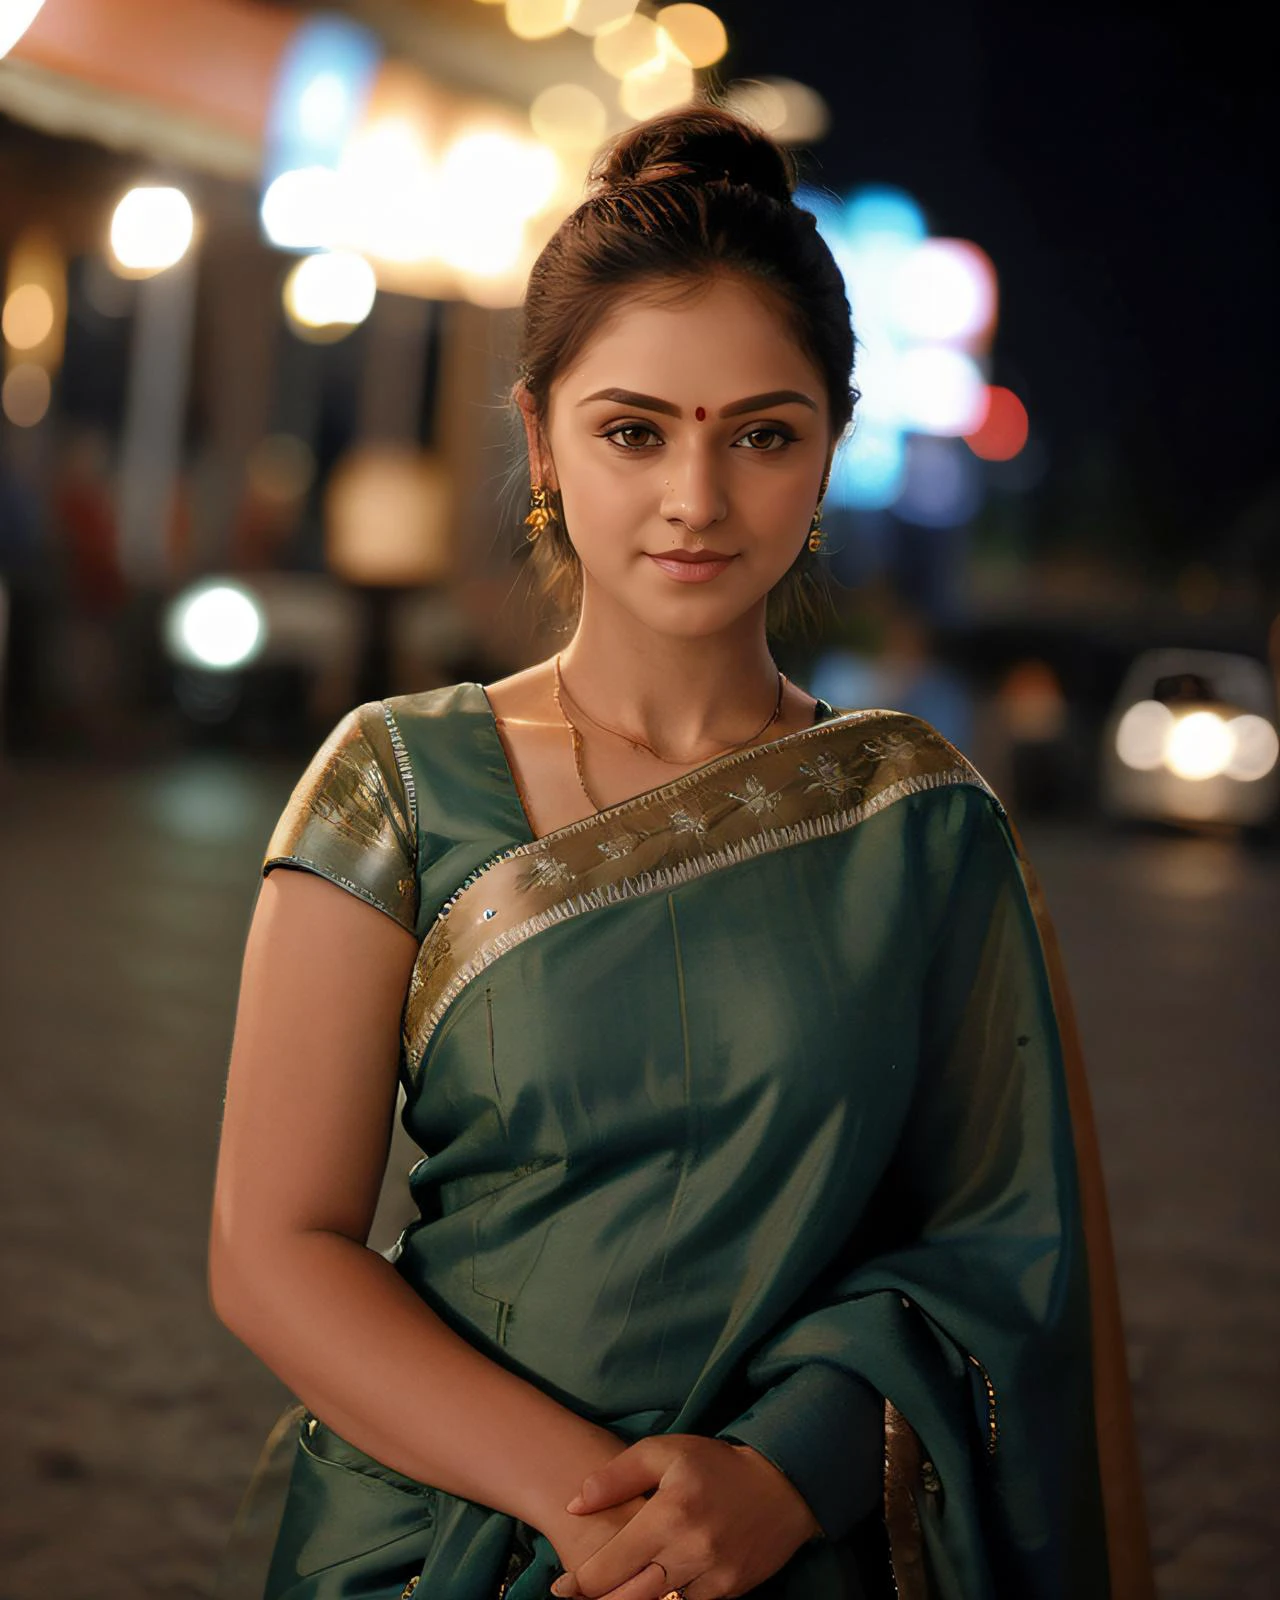 a photo of a 30-year-old woman, smrn, professional portrait photo,high neck Dhoti Saree, high ponytail,  solo, night time, city bokeh lights   